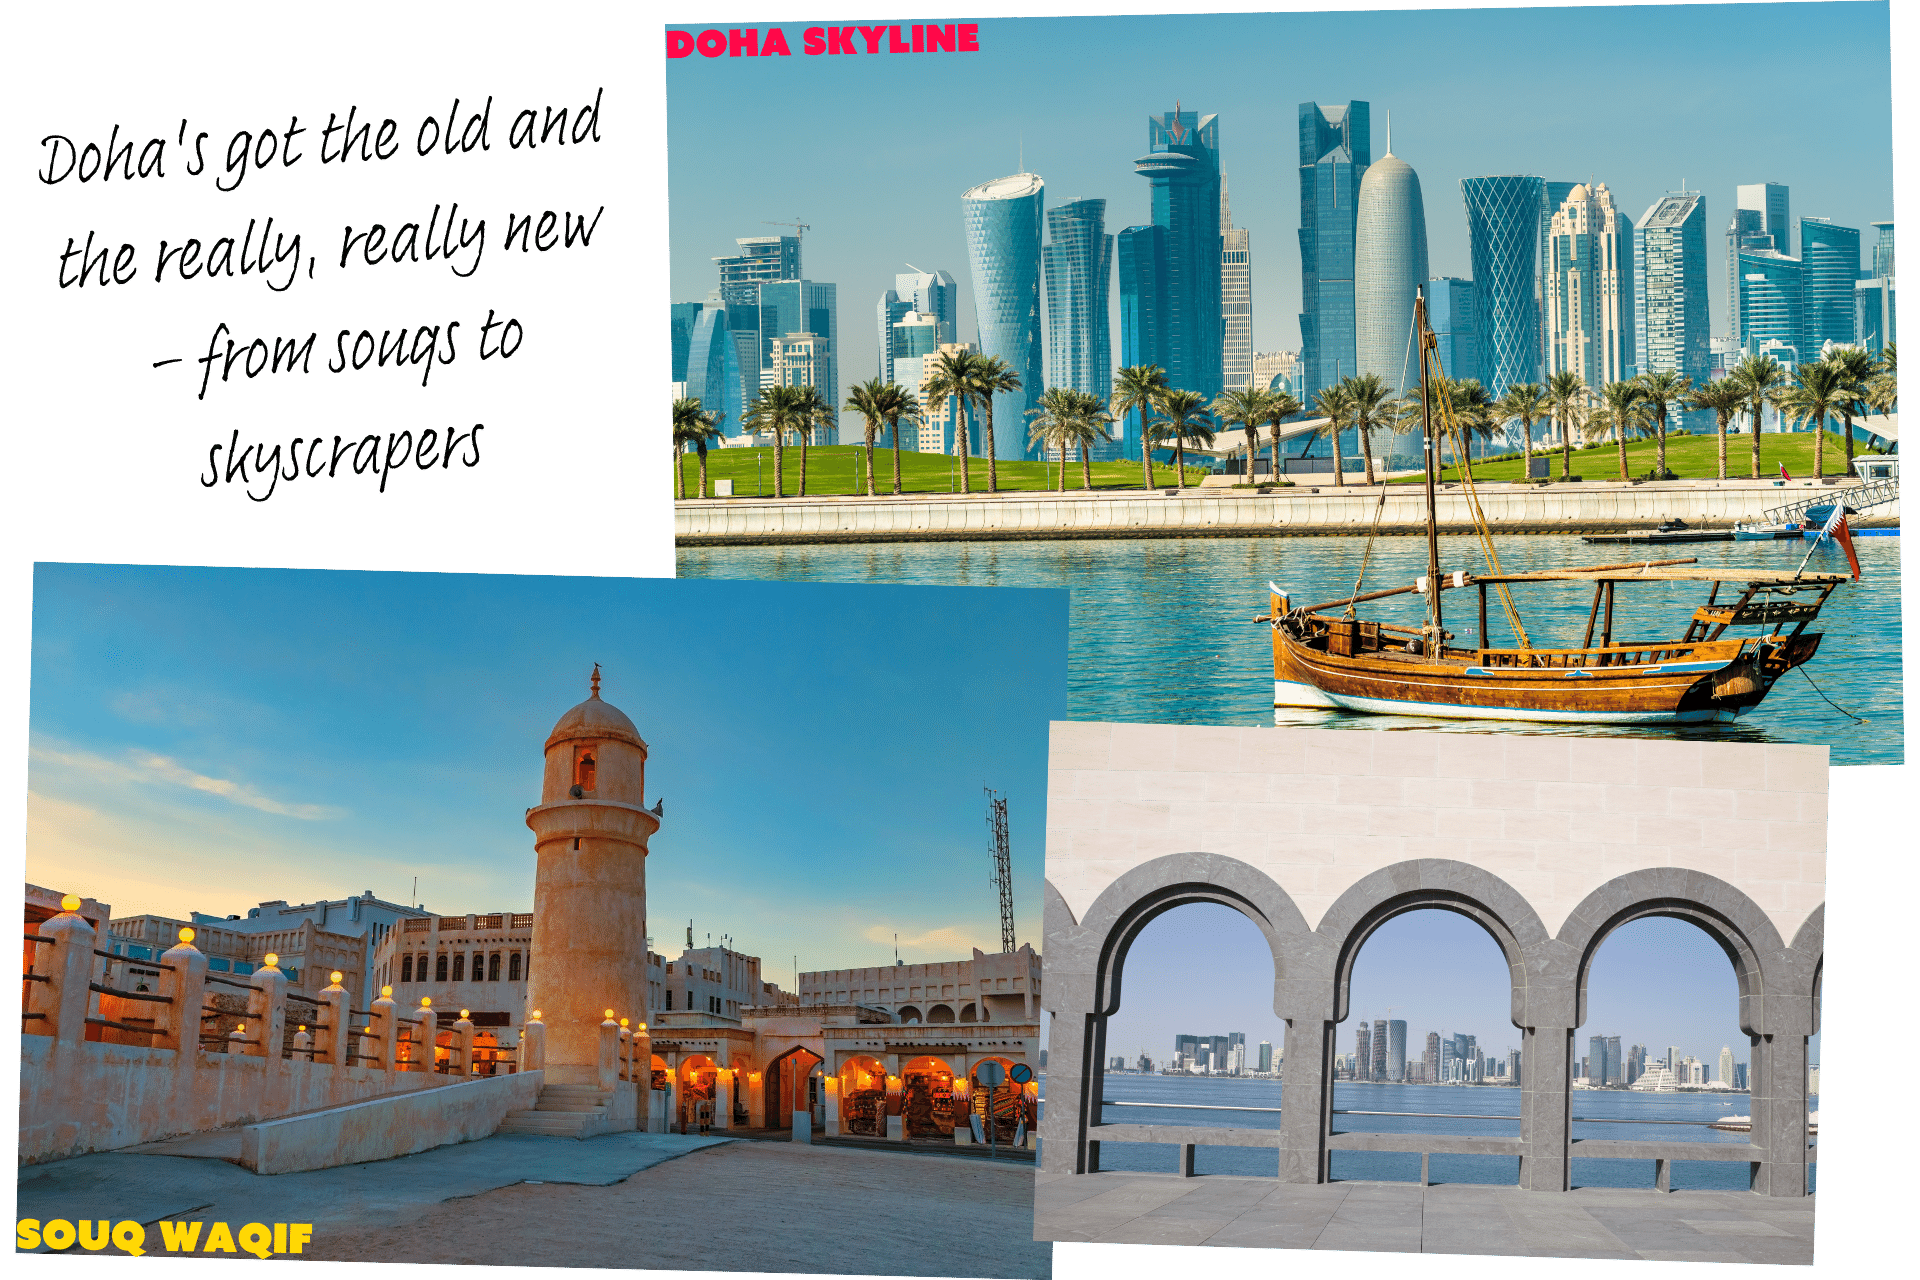 Collage of things to do in Doha: skyscrapers and the Souq Waqif - one of the best stopover cities flying to Asia.